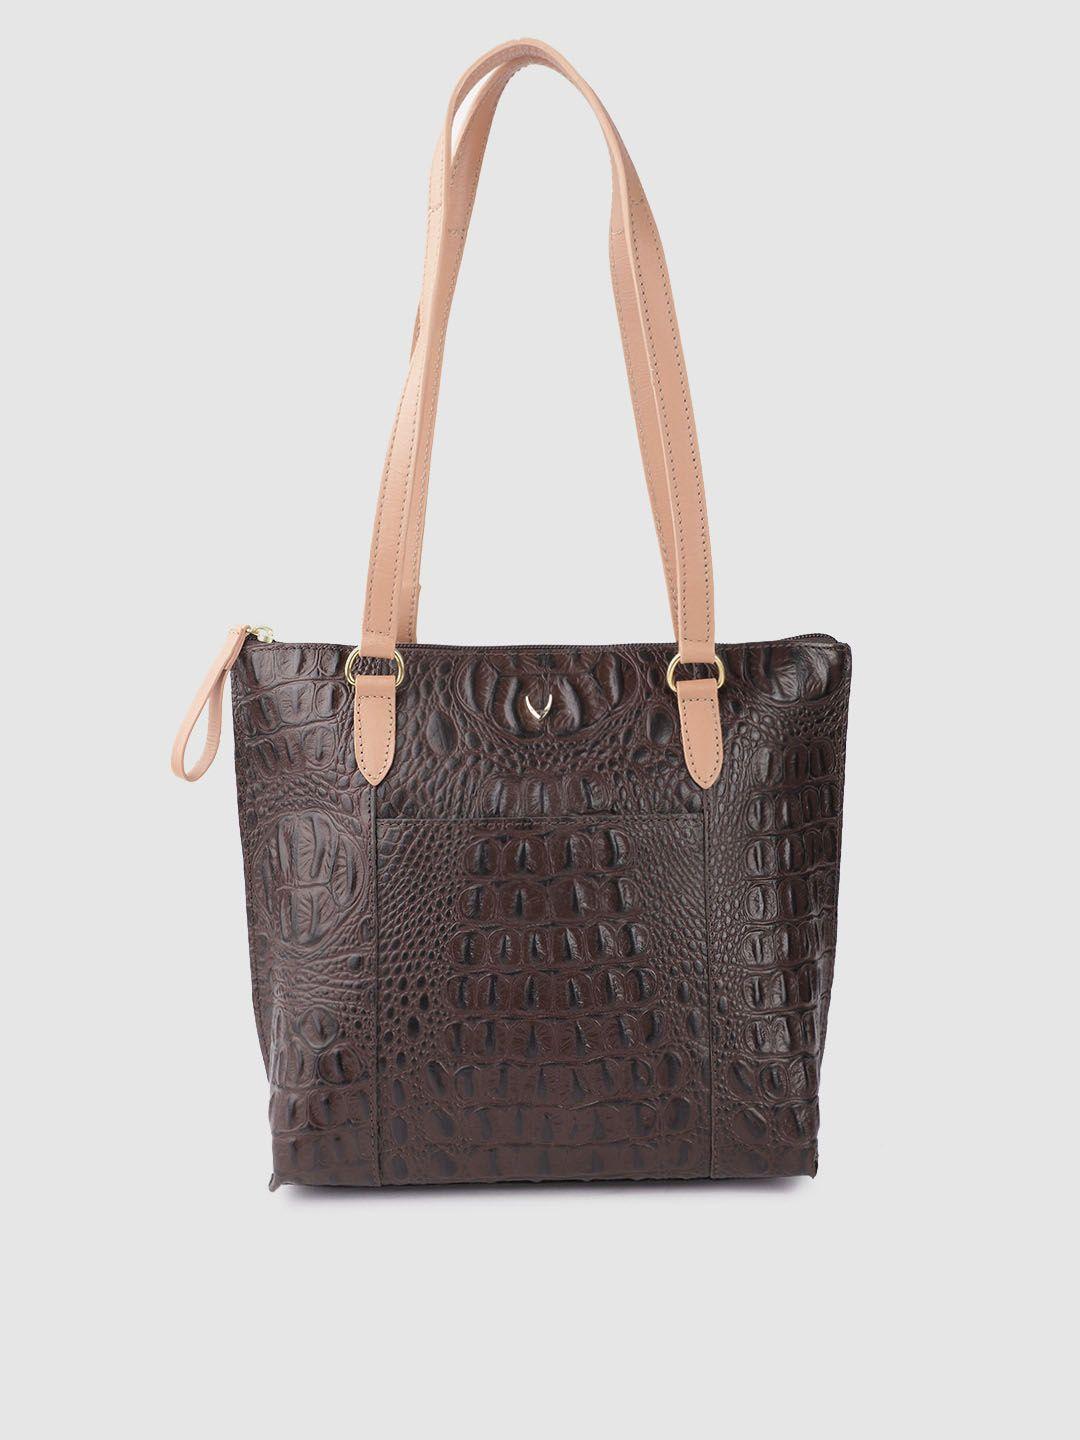 hidesign coffee brown croc textured leather structured shoulder bag